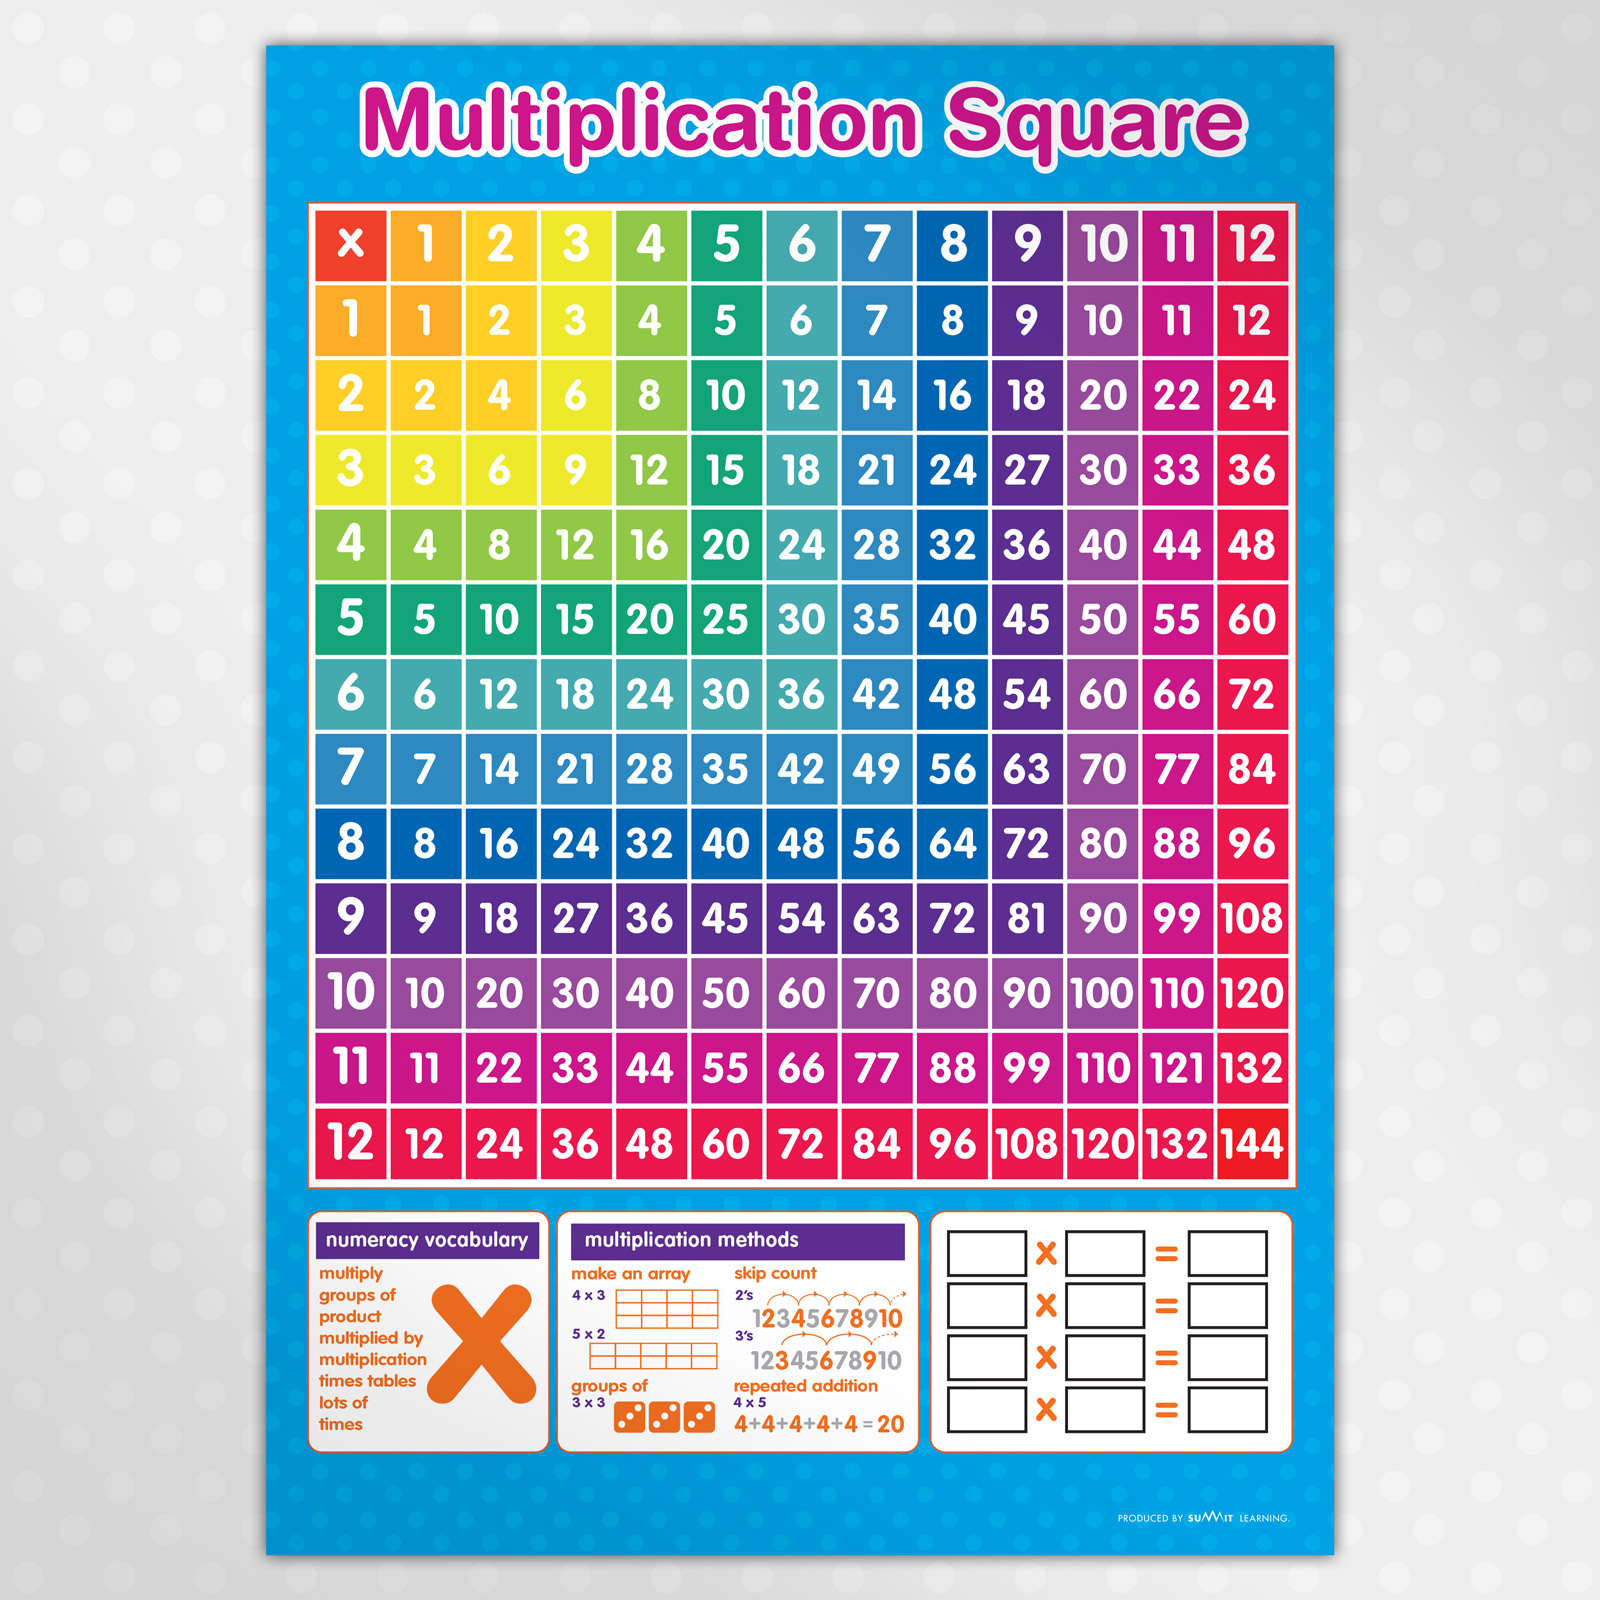 Multiplication Square Poster A3